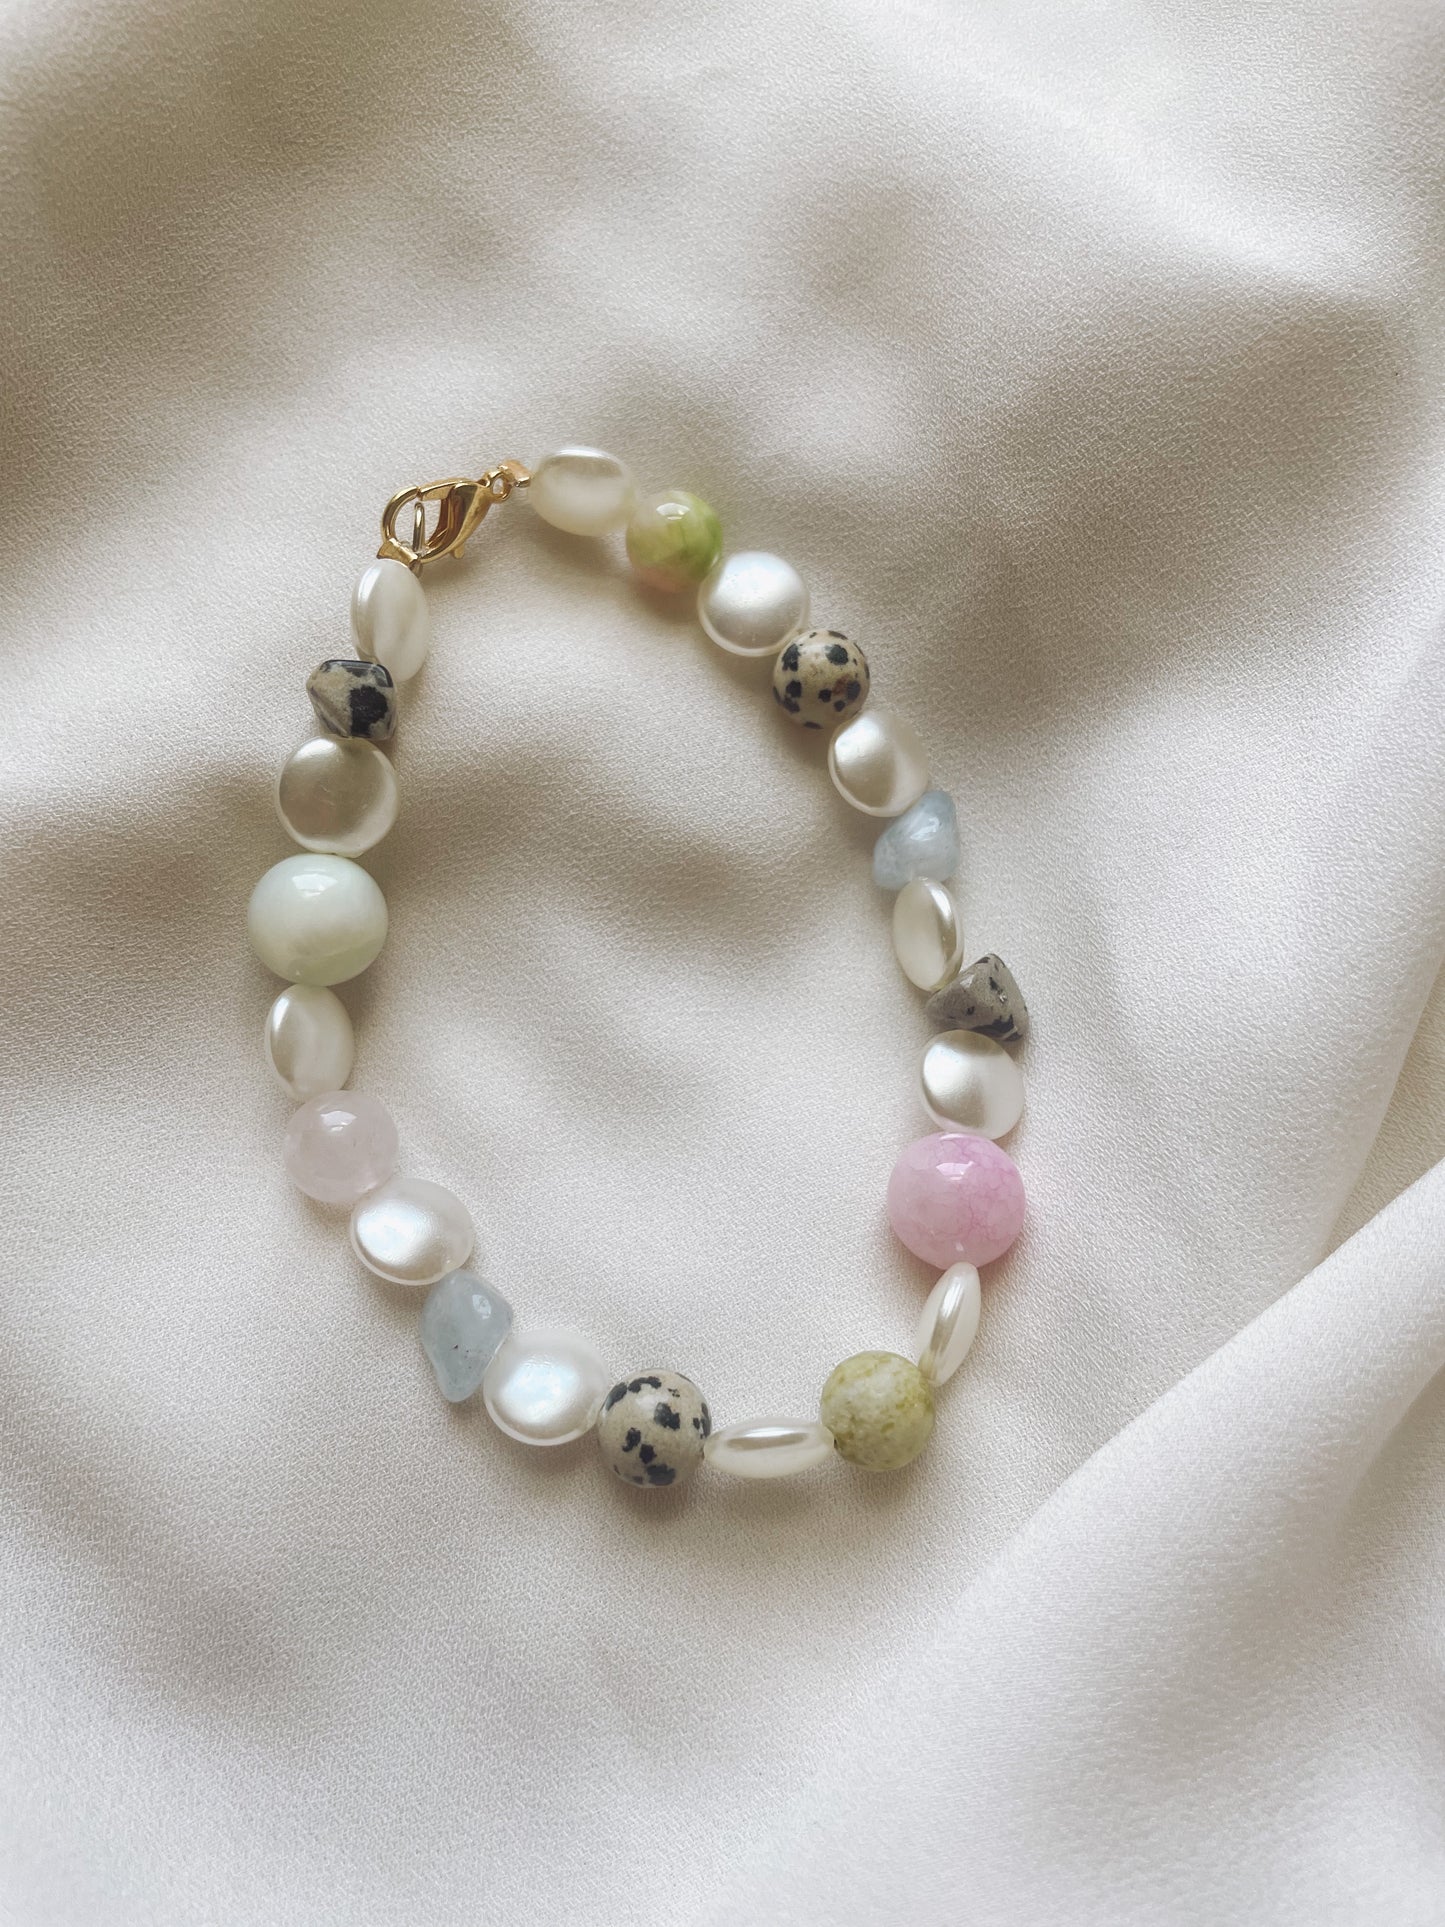 Abstract Gemstone Beaded Bracelet with Pearls